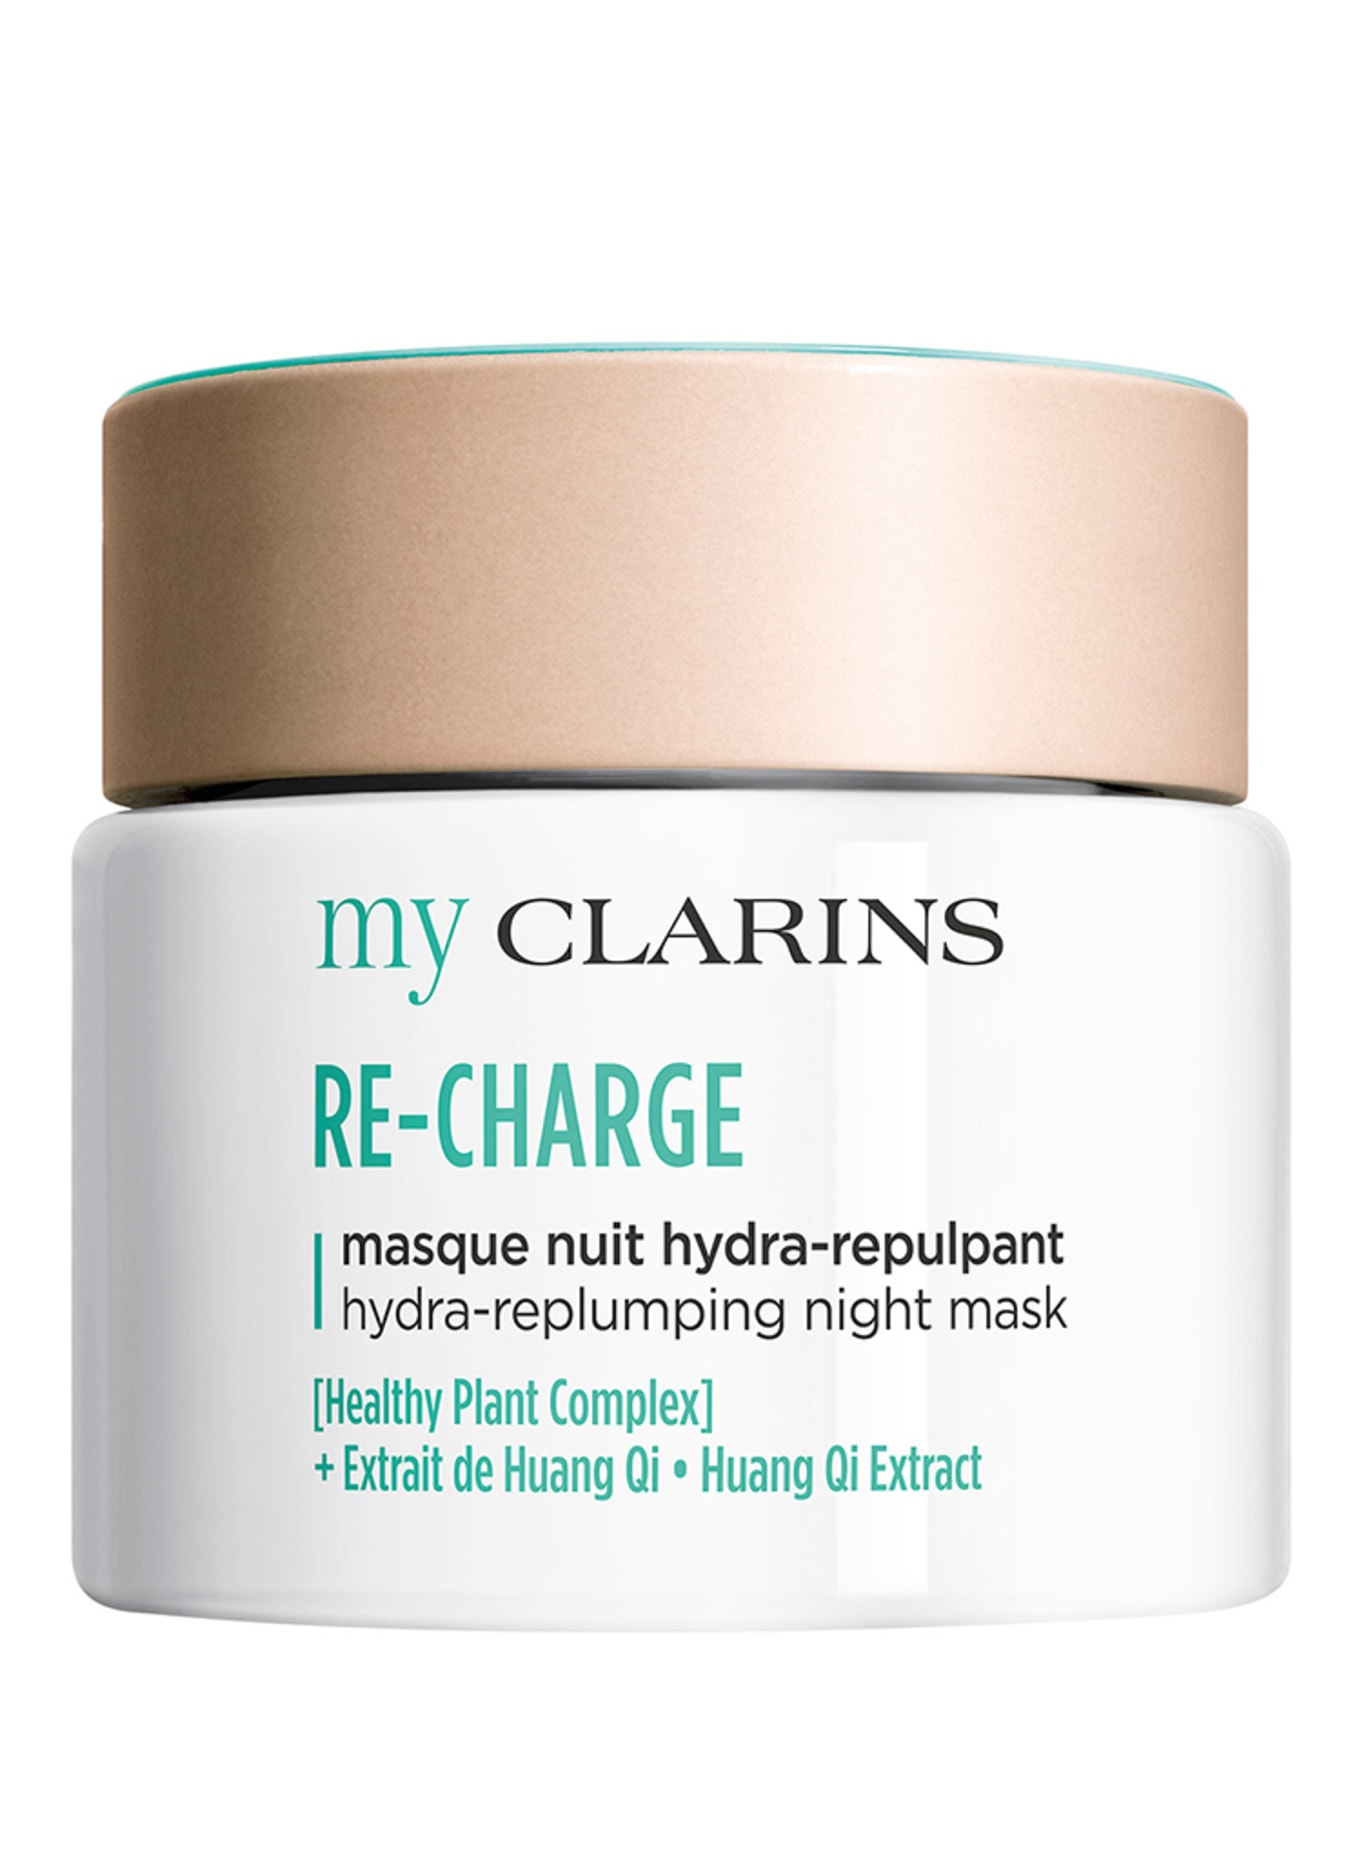 CLARINS RE-CHARGE HYDRA REPLUMPING NIGHT MASK (Obrázek 1)